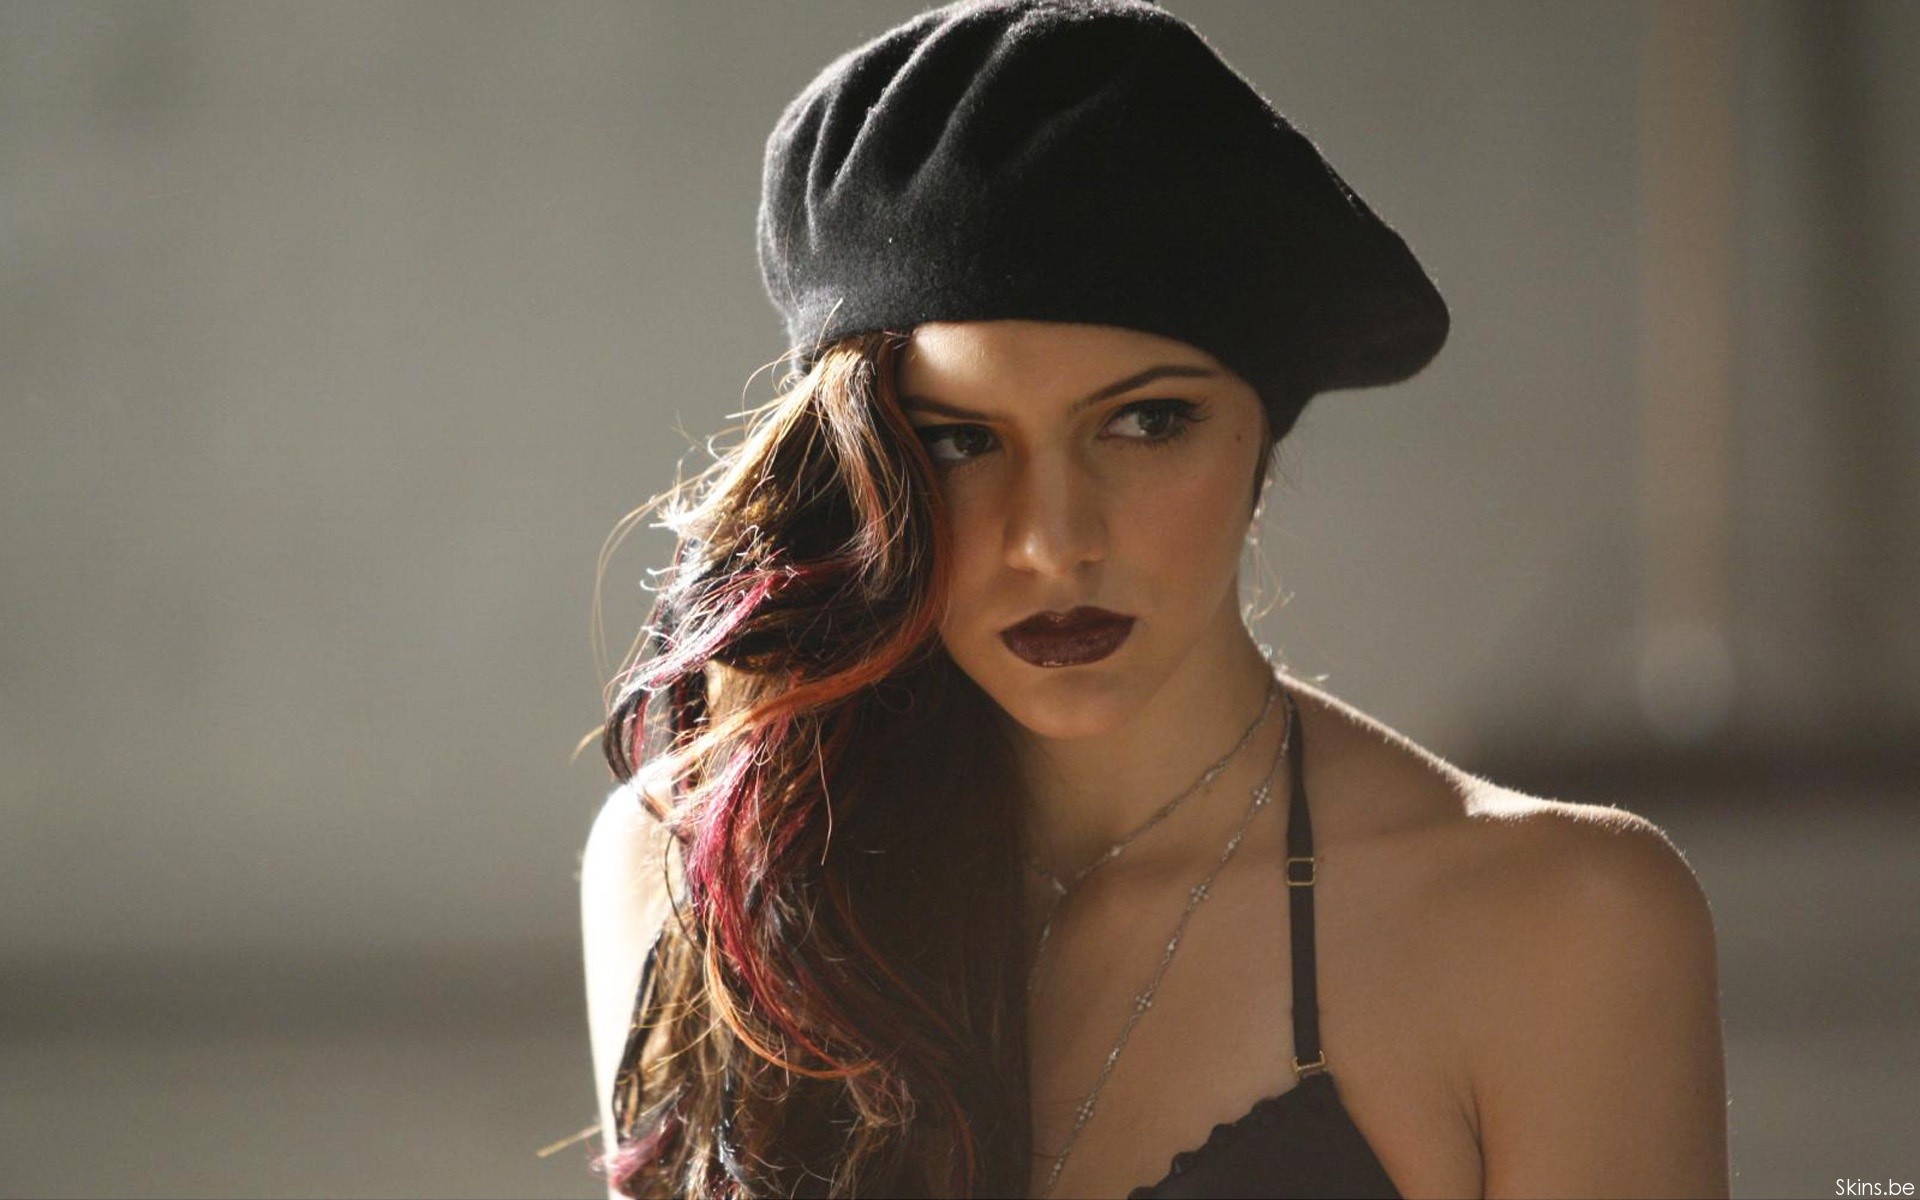 Lips Women Dyed Hair Funny Hats Model Red Lipstick Face Katharine McPhee Brunette Brown Eyes Looking 1920x1200